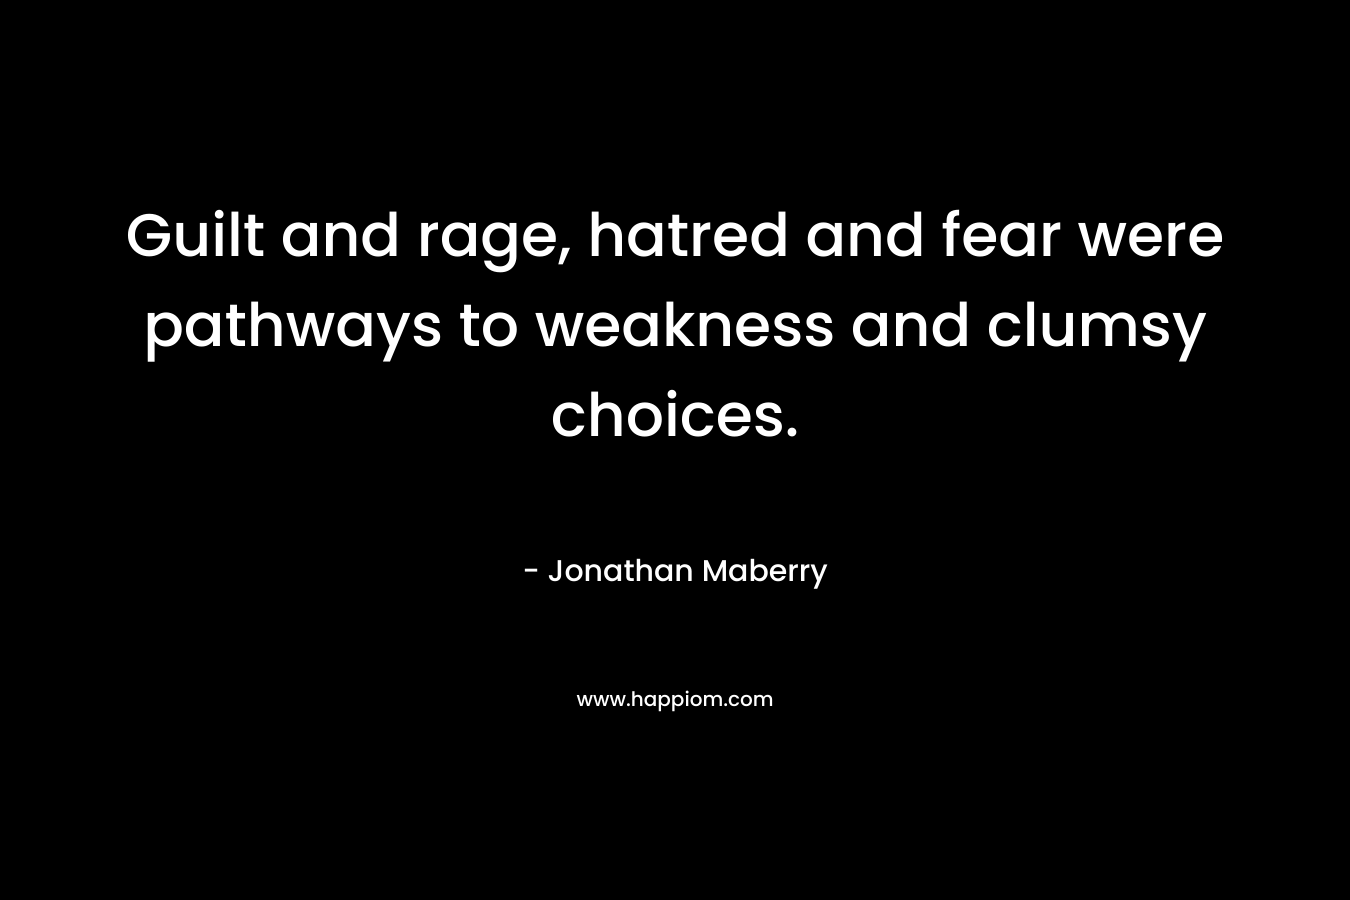 Guilt and rage, hatred and fear were pathways to weakness and clumsy choices. – Jonathan Maberry